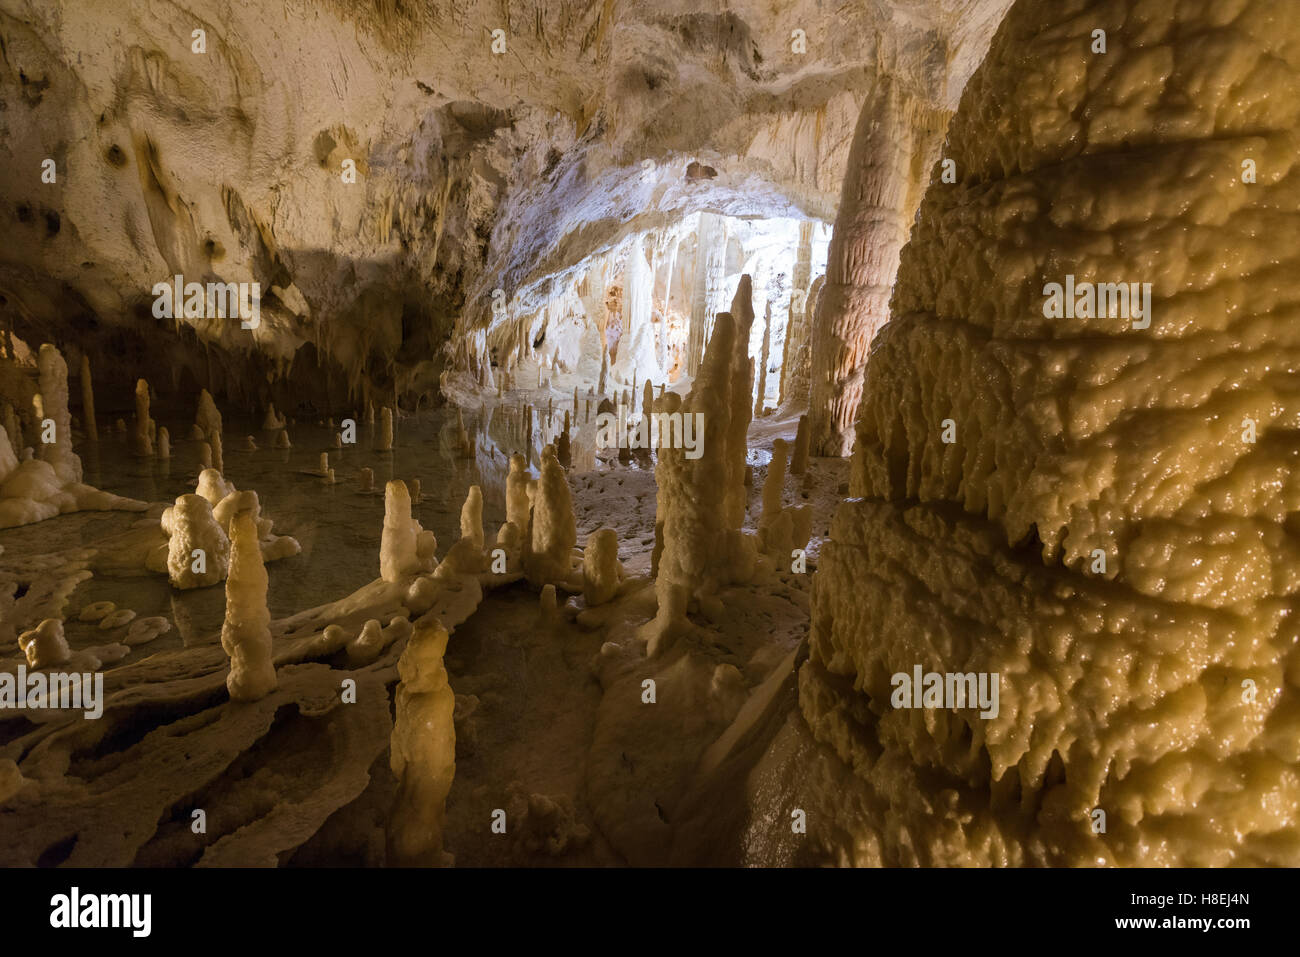 The natural show of Frasassi Caves with sharp stalactites and stalagmites, Genga, Province of Ancona, Marche, Italy, Europe Stock Photo